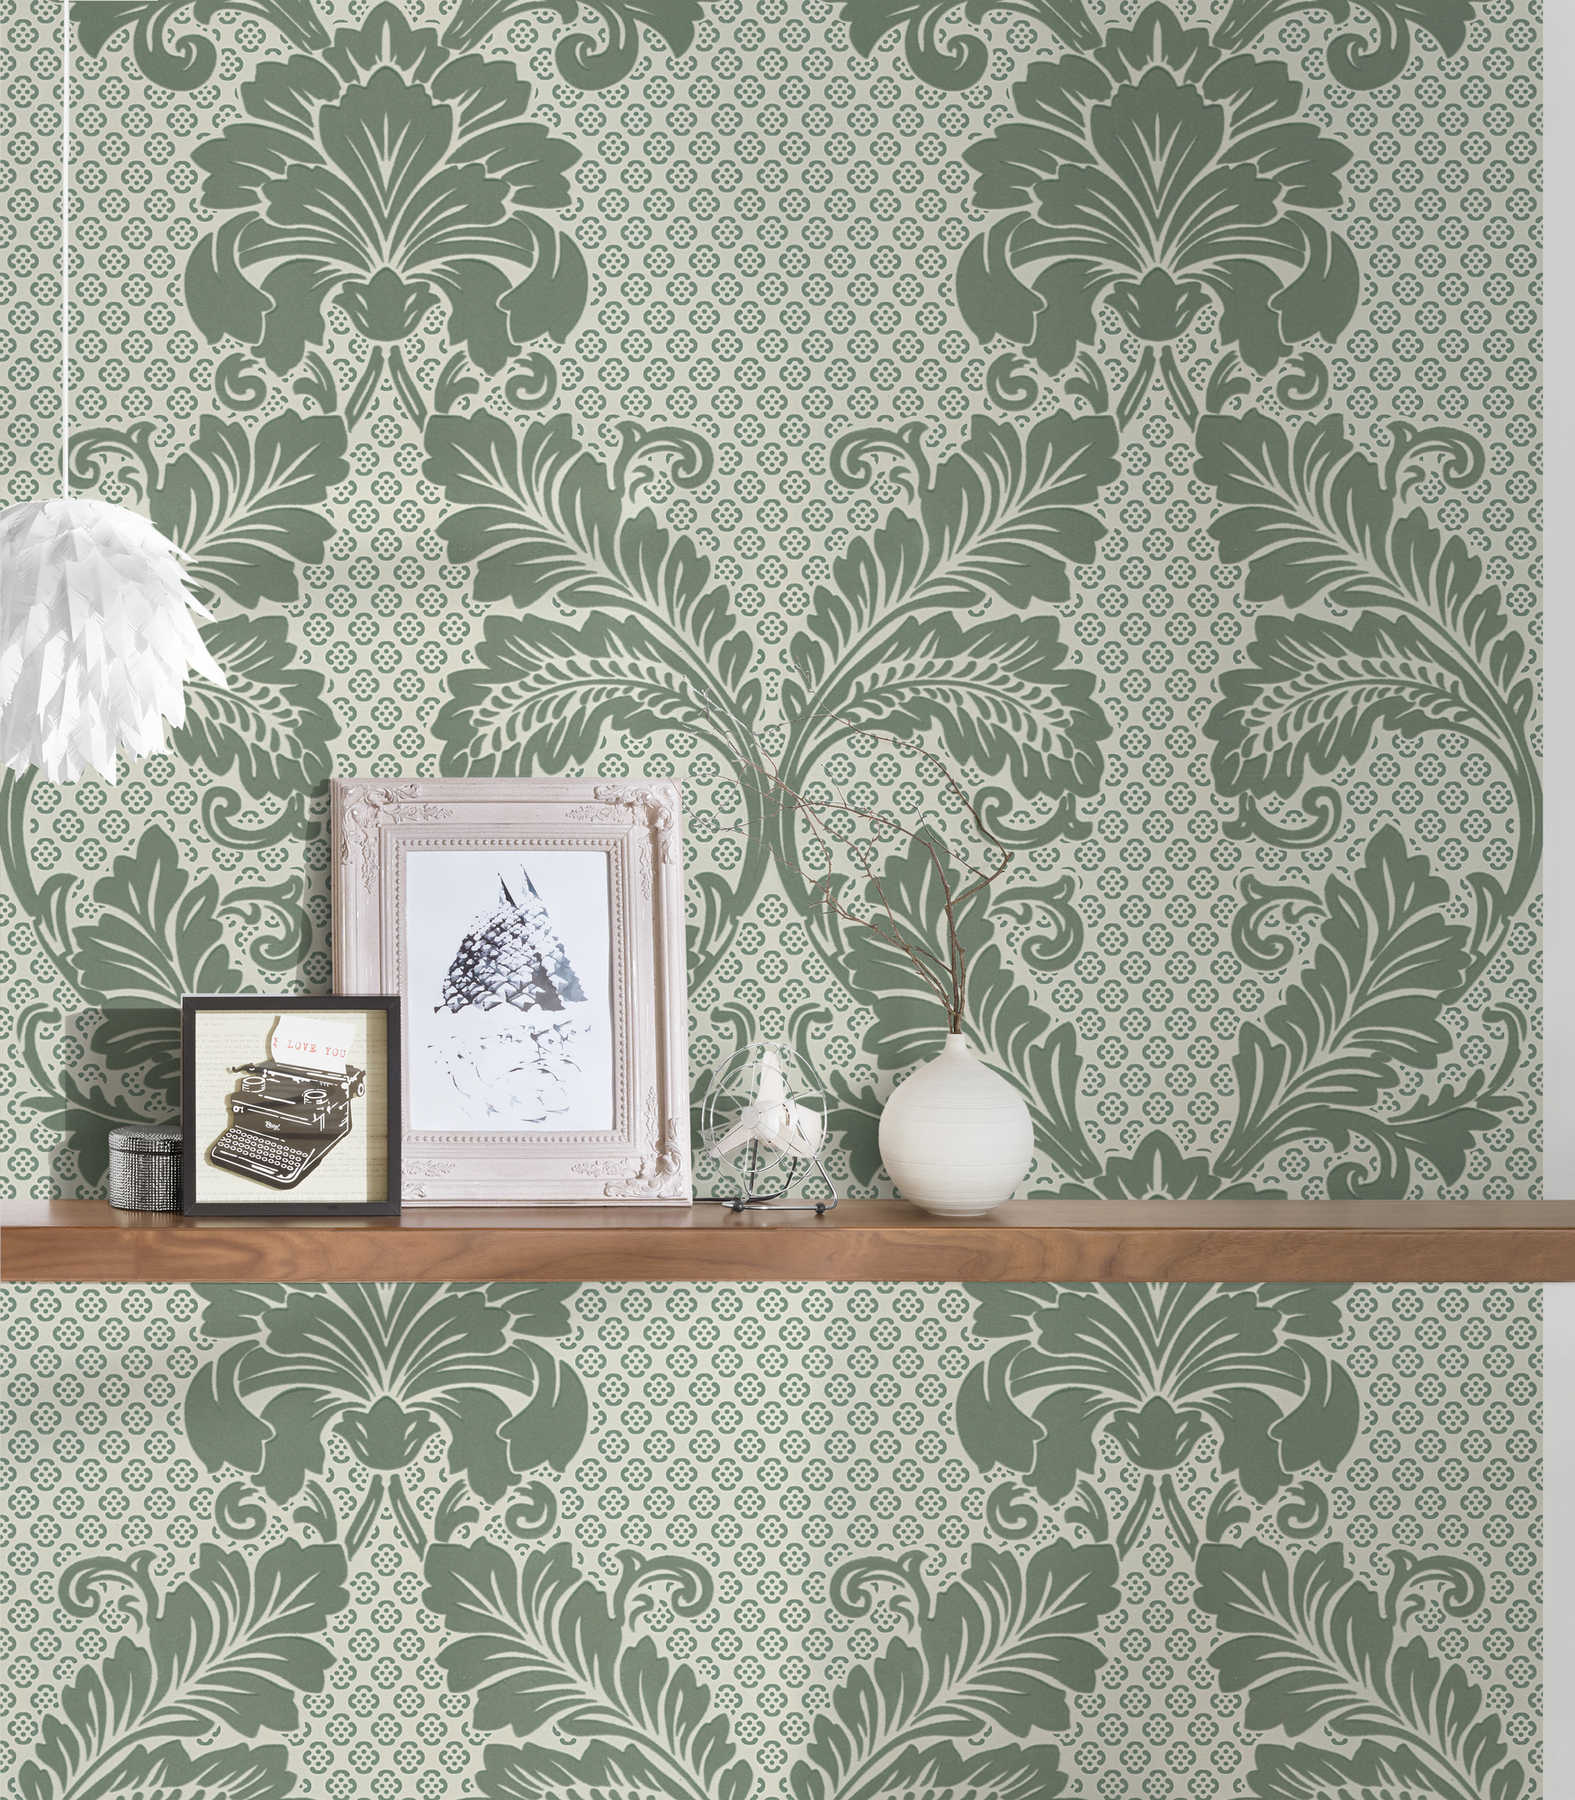             Patterned ornamental wallpaper with large floral motif - green, blue
        